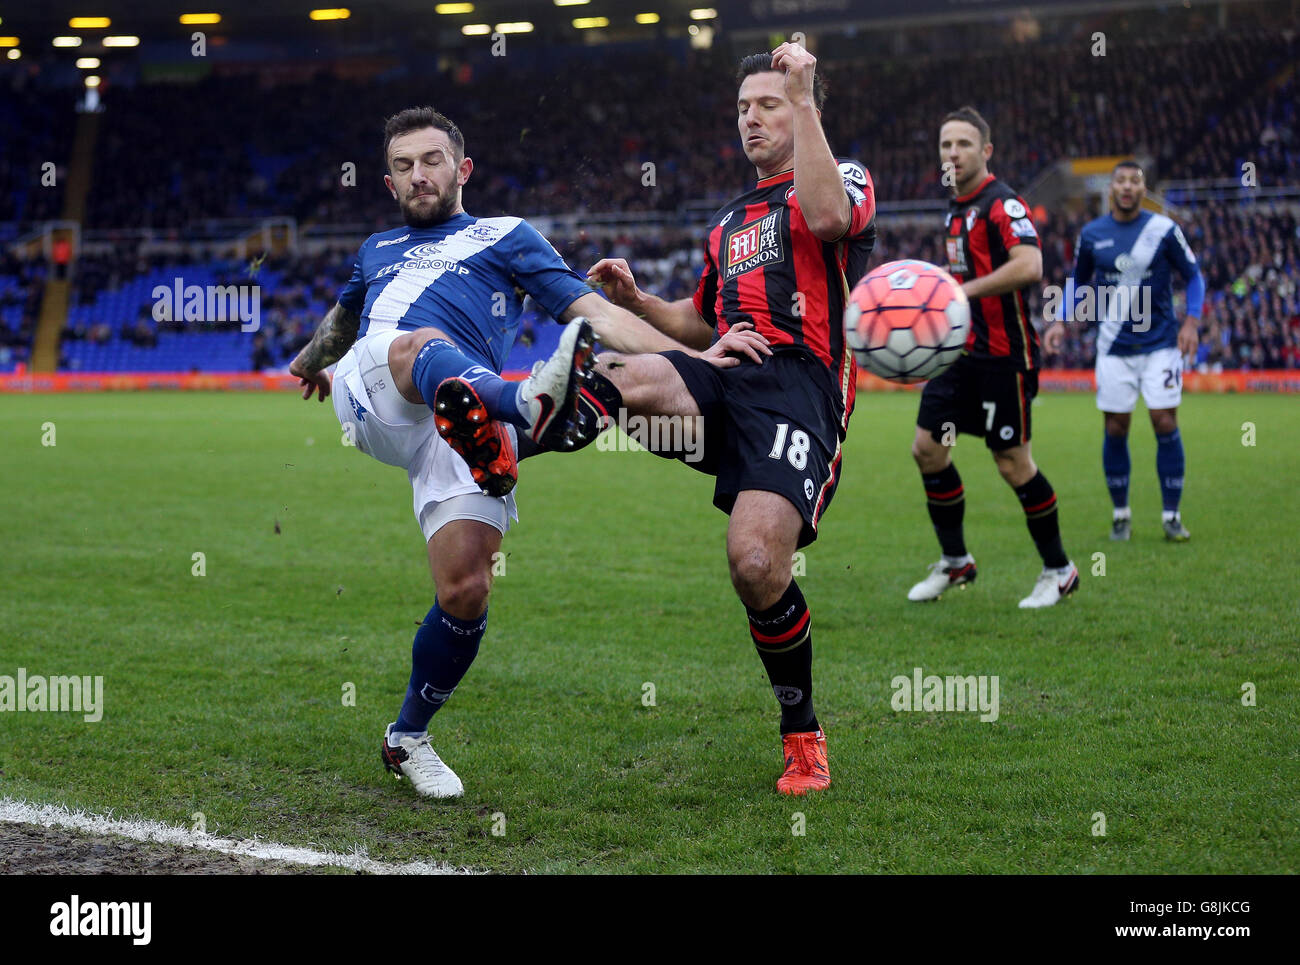 Birmingham City's Neal Eardley (left) challenges AFC Bournemouth's Yann Kermorgant for the ball during the Emirates FA Cup, third round game at St Andrews, Birmingham. Stock Photo